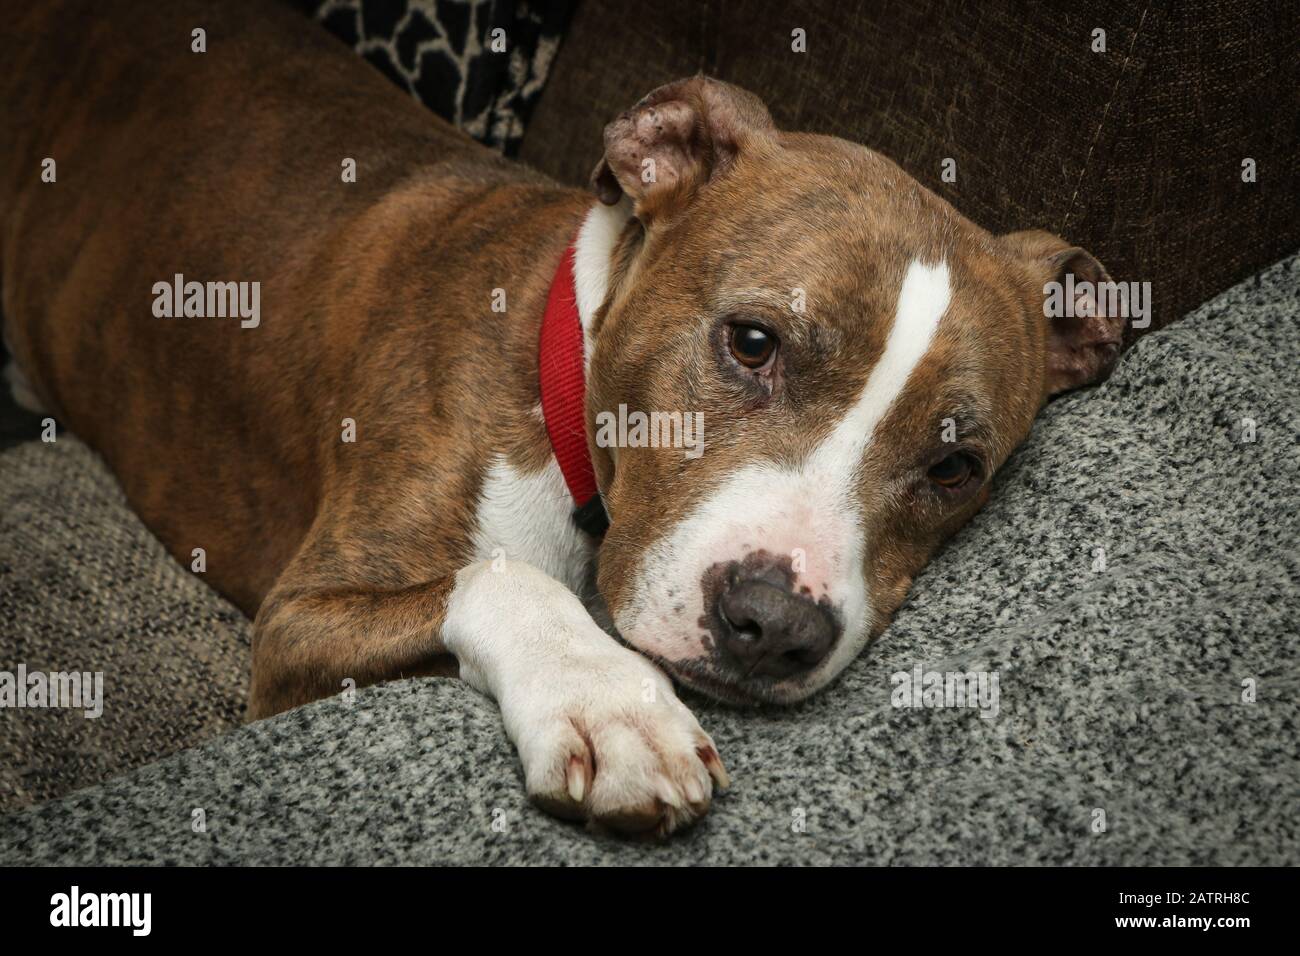 The old american stafforshire terrier is lying on a sofa and is sleepy and tired. Looks like he is sad and lonely. Stock Photo